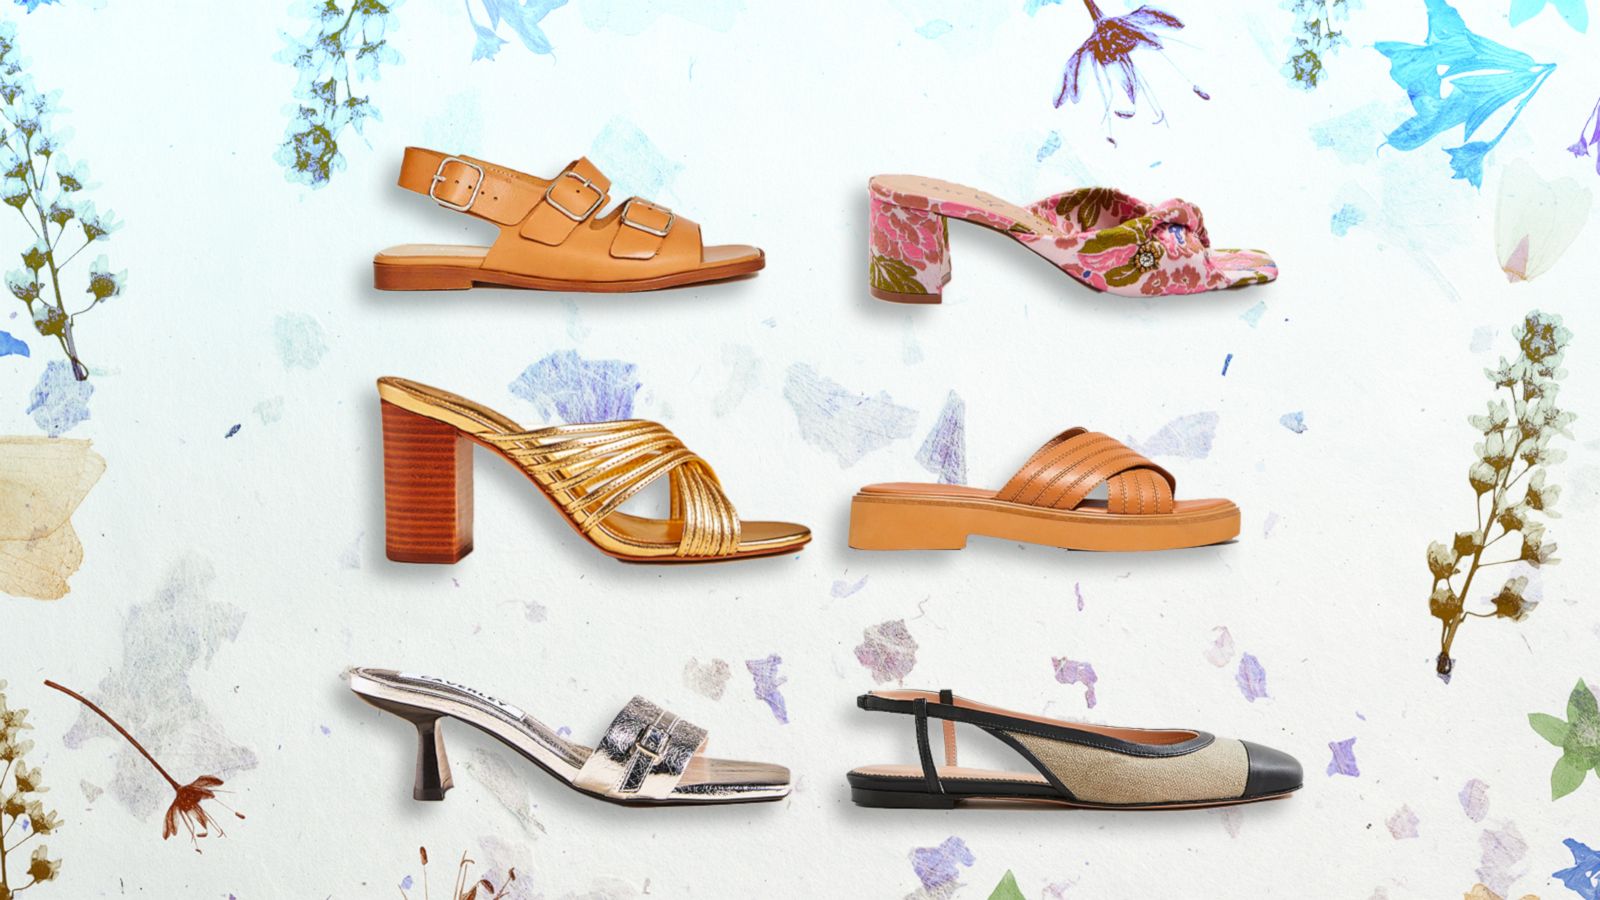 Put spring in your step with flats, sandals and heels for the new